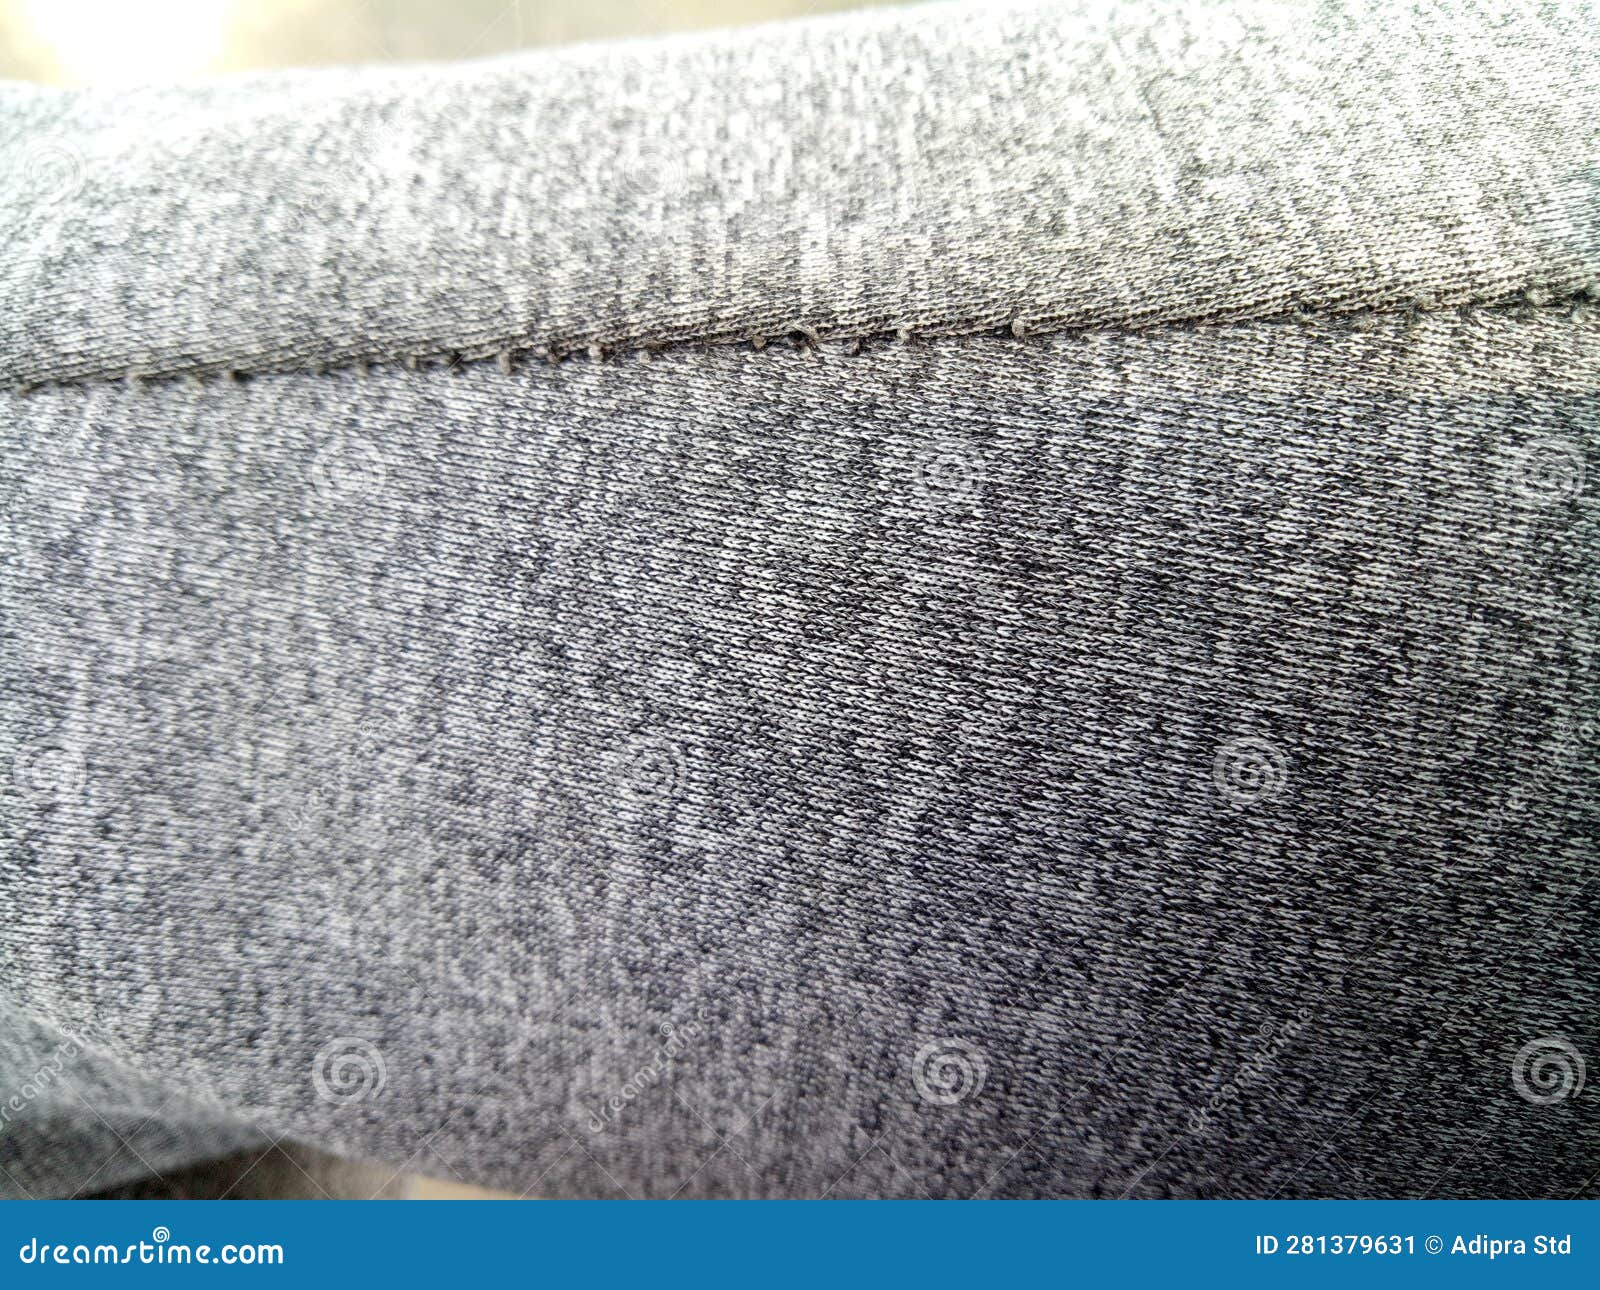 Photo of the Texture of a Gray Sweatpants Stock Image - Image of people ...